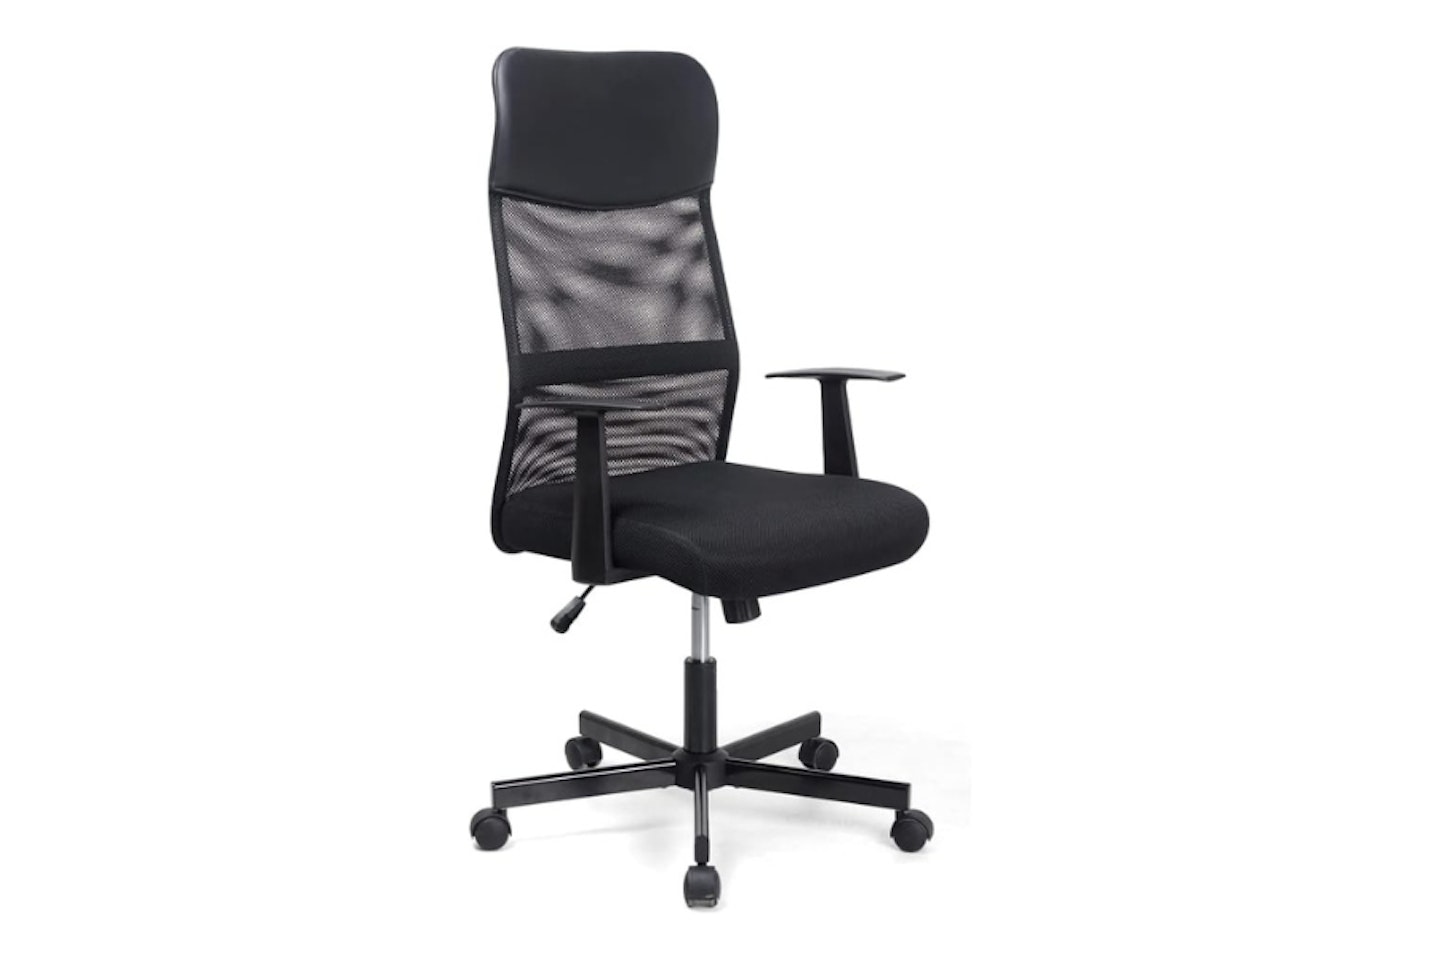 T-THREE.High Back Adjustable Office Chair 